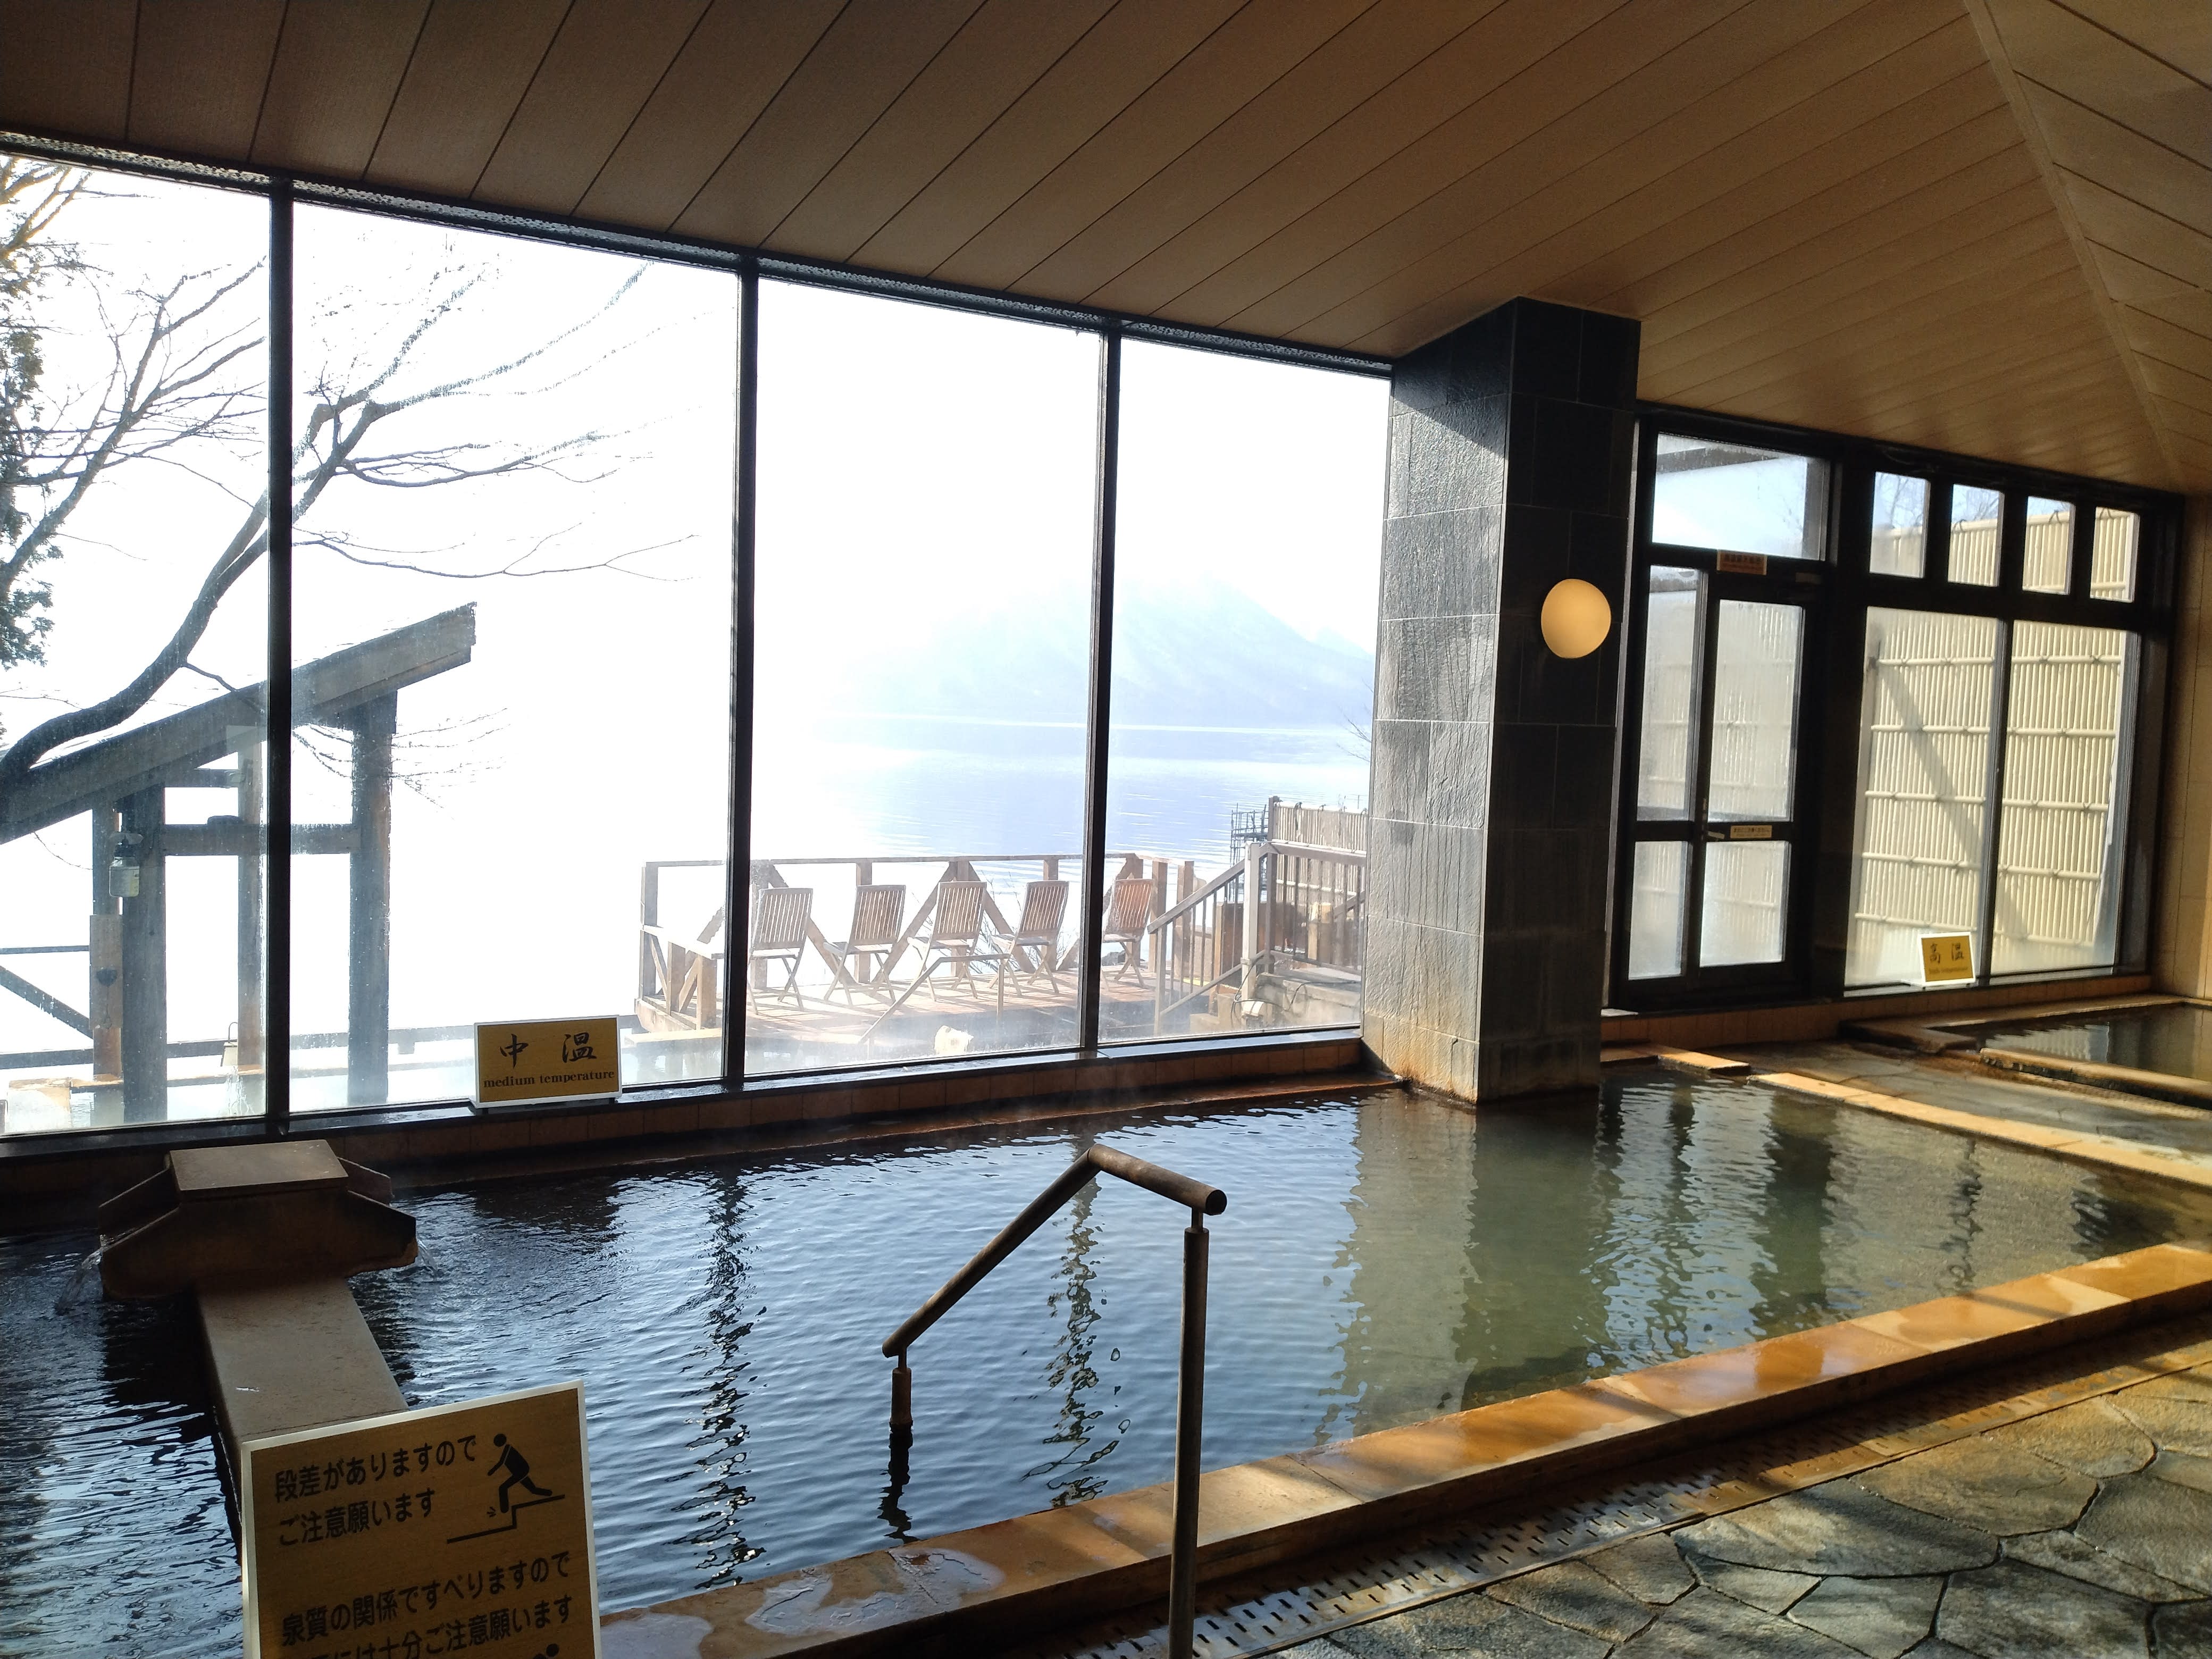 A hot spring bath with an excellent lakeside view.